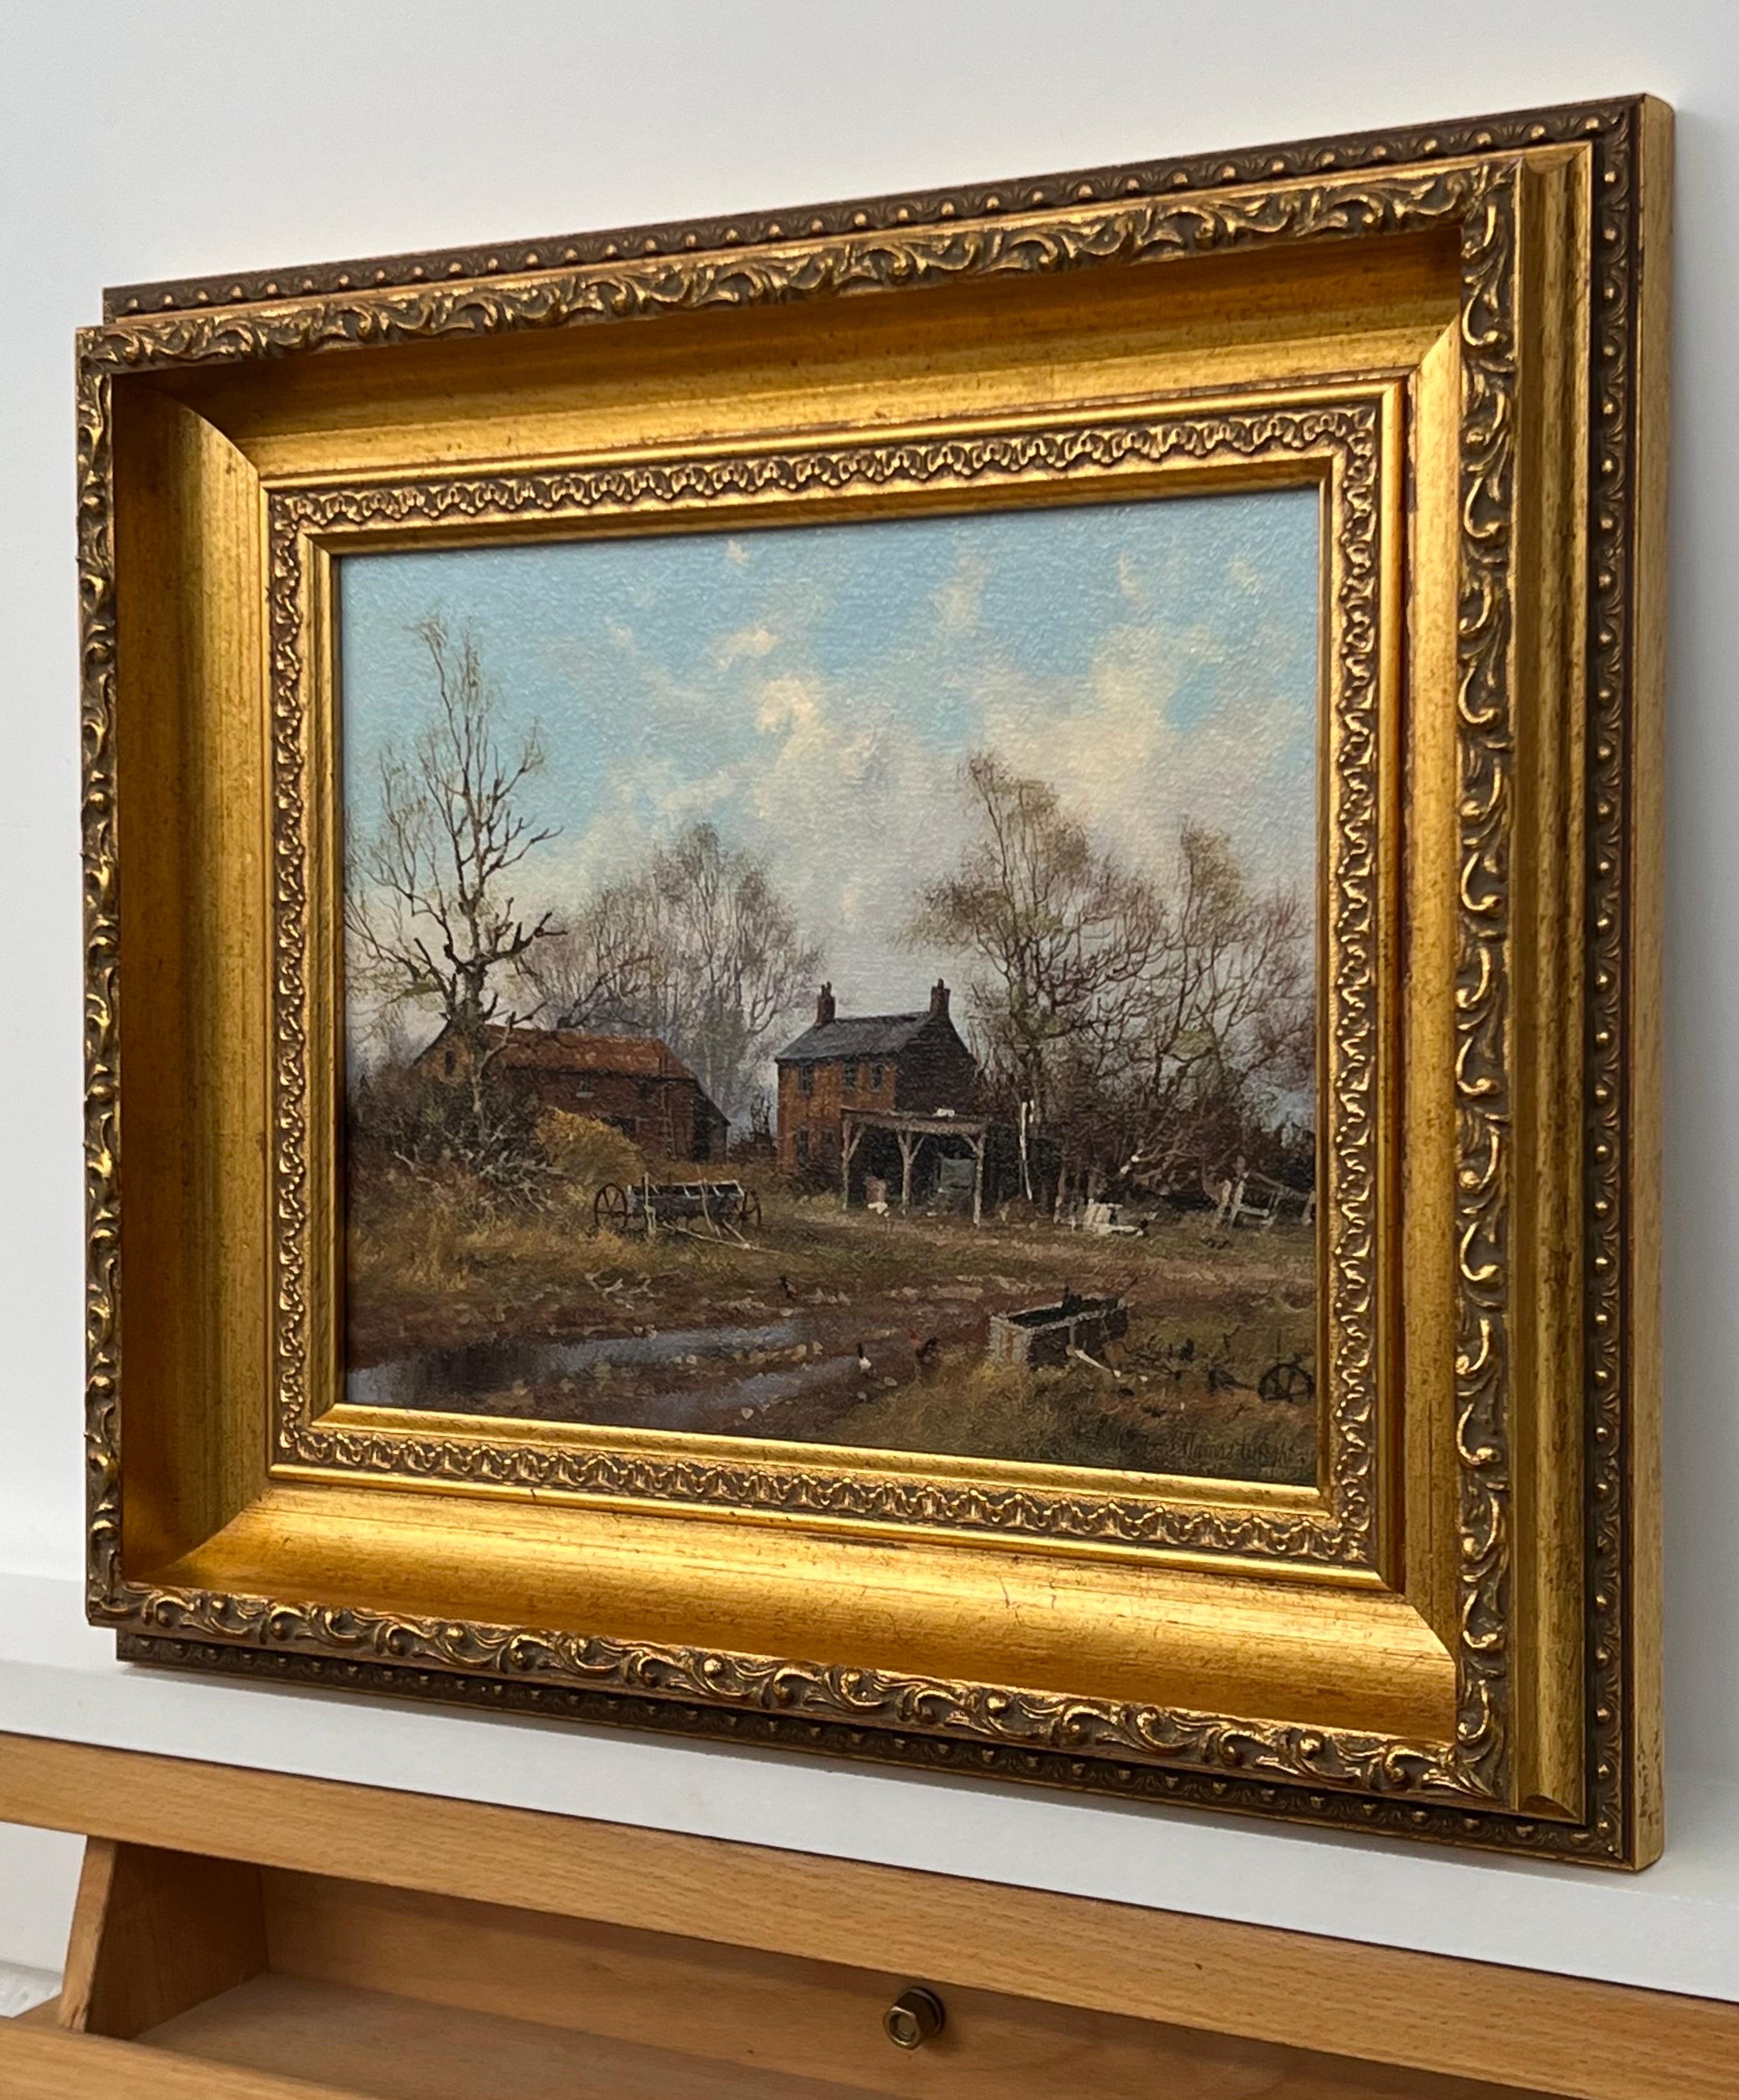 Painting of Farm with Geese in the English Countryside by 20th Century British Artist, James Wright 
Signed, Original, Oil on Canvas, housed in a beautiful ornate gold frame. 
Provenance: Part of the English Heritage Series No.111

Art measures 10 x